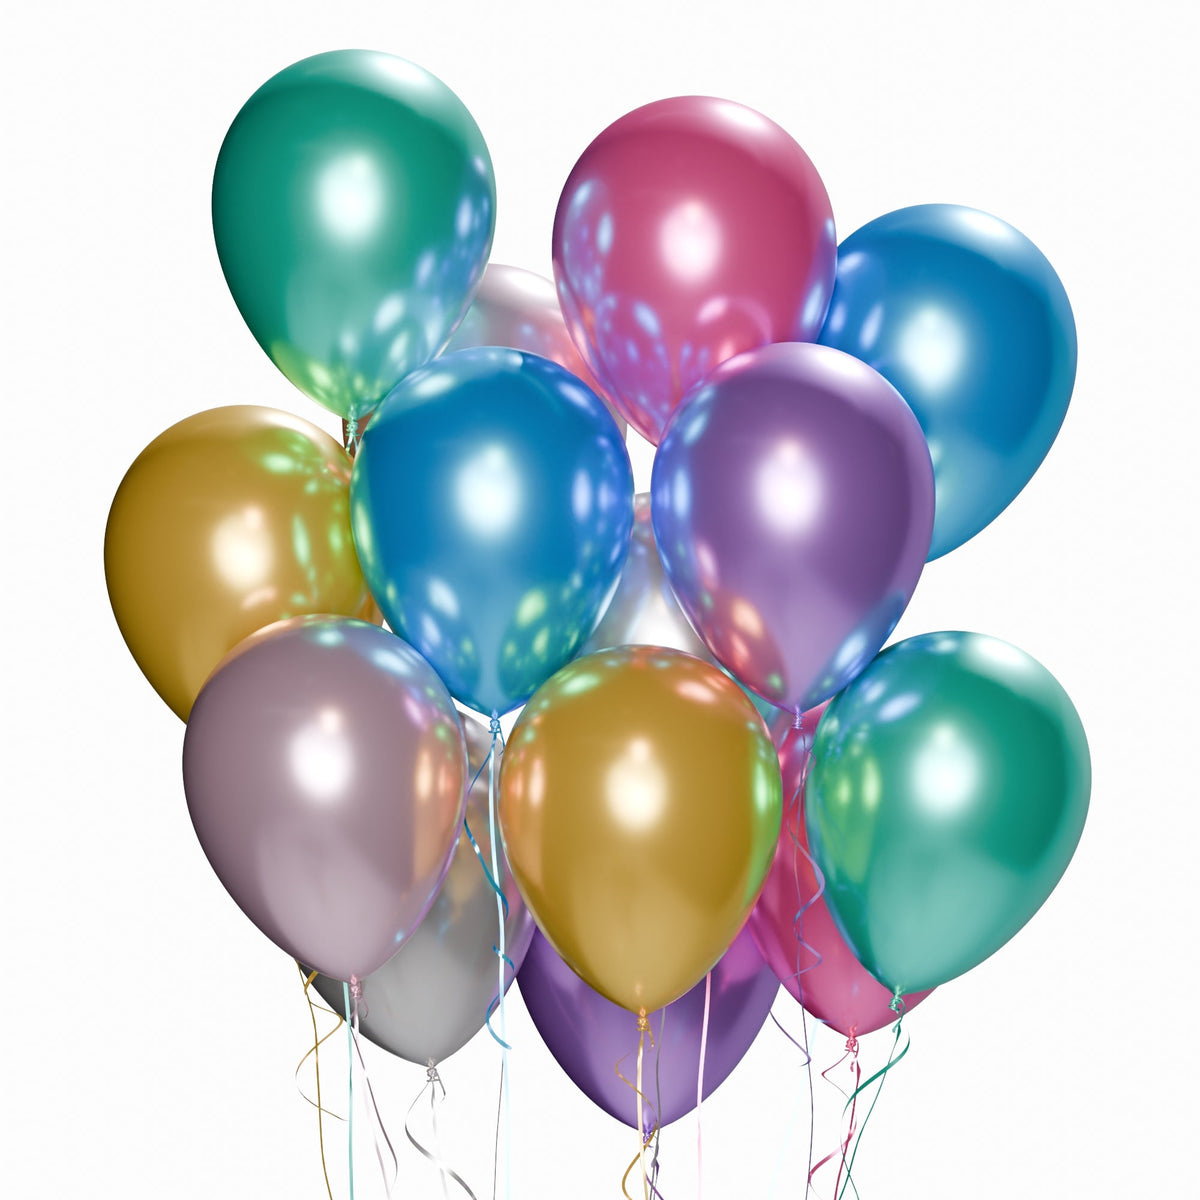 WIDE OCEAN INTERNATIONAL TRADE BEIJING CO., LTD Balloons Assorted Color Latex Balloon 12 Inches, Chrome Collection, 15 Count 810064198724